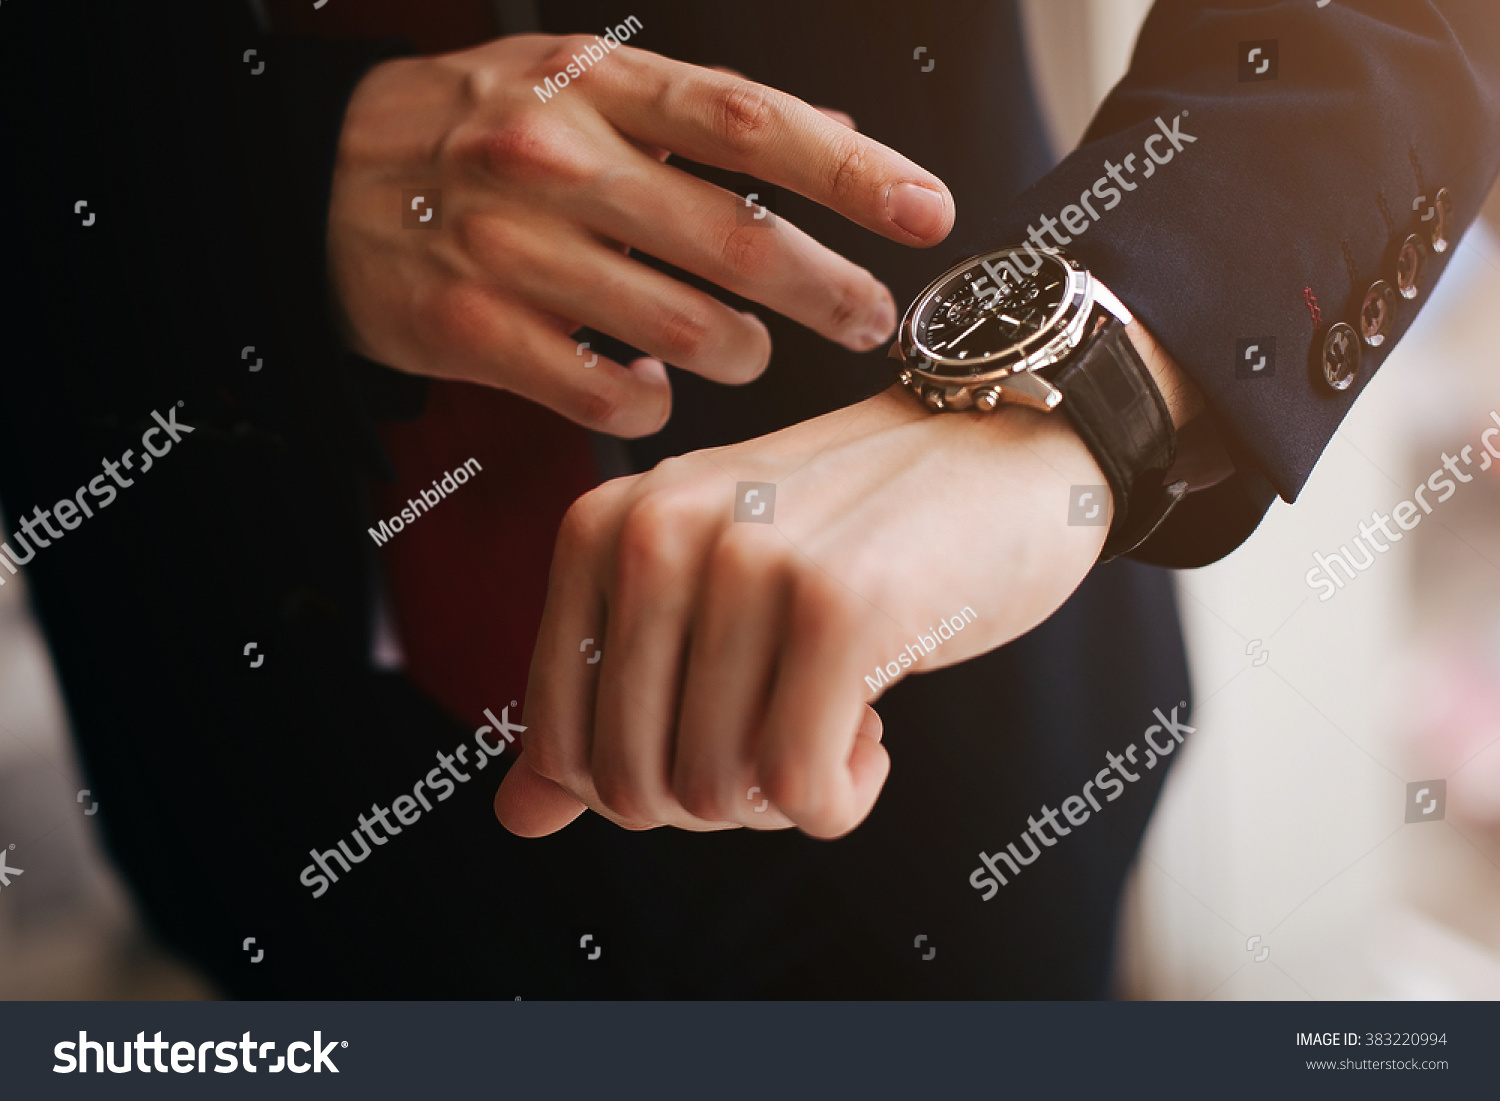 closeup designer watch on businessman hand, he looks on the time and hurrying #383220994